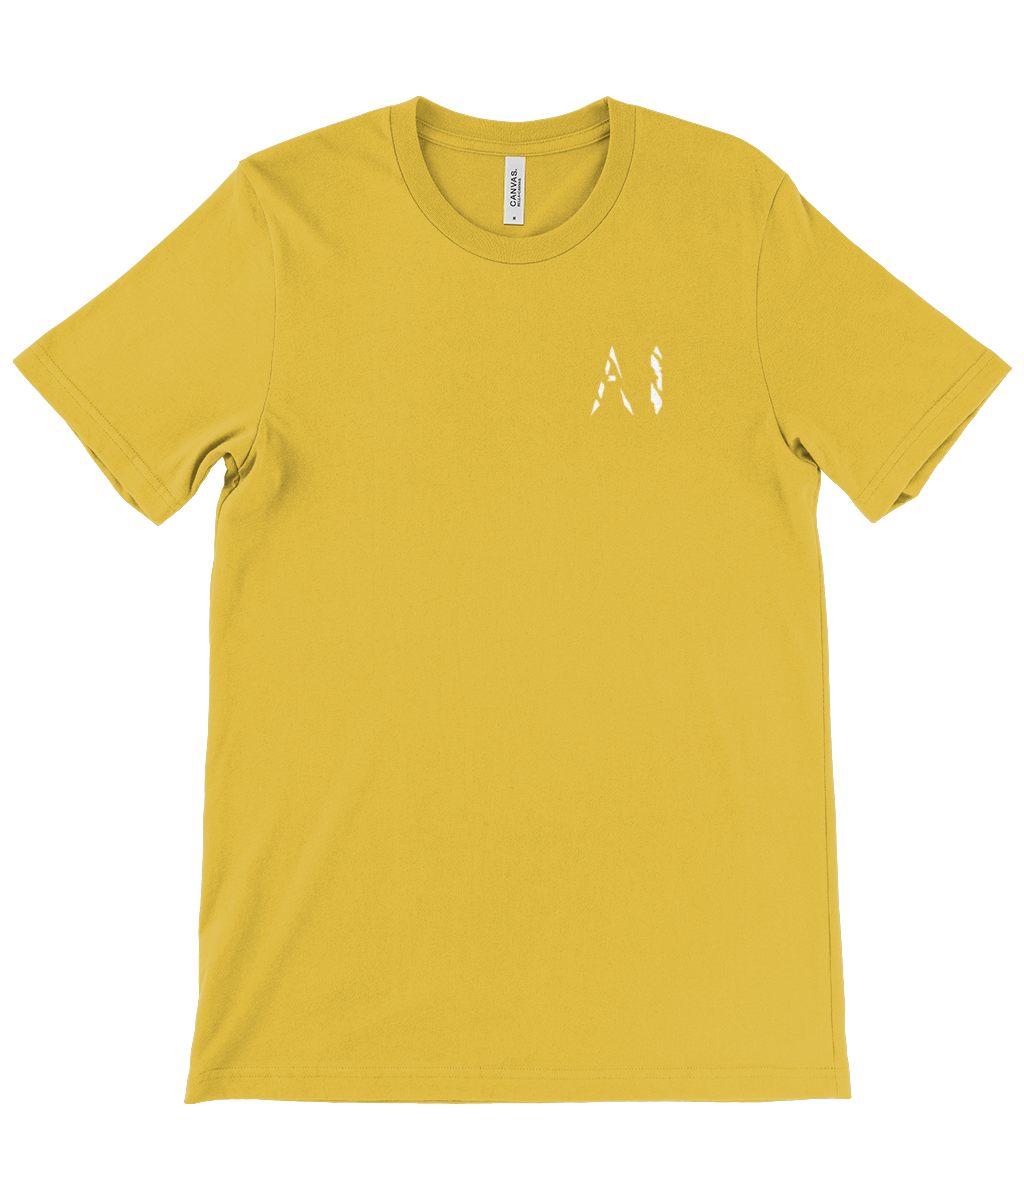 Mens yellow Casual T-Shirt with white logo on the left chest